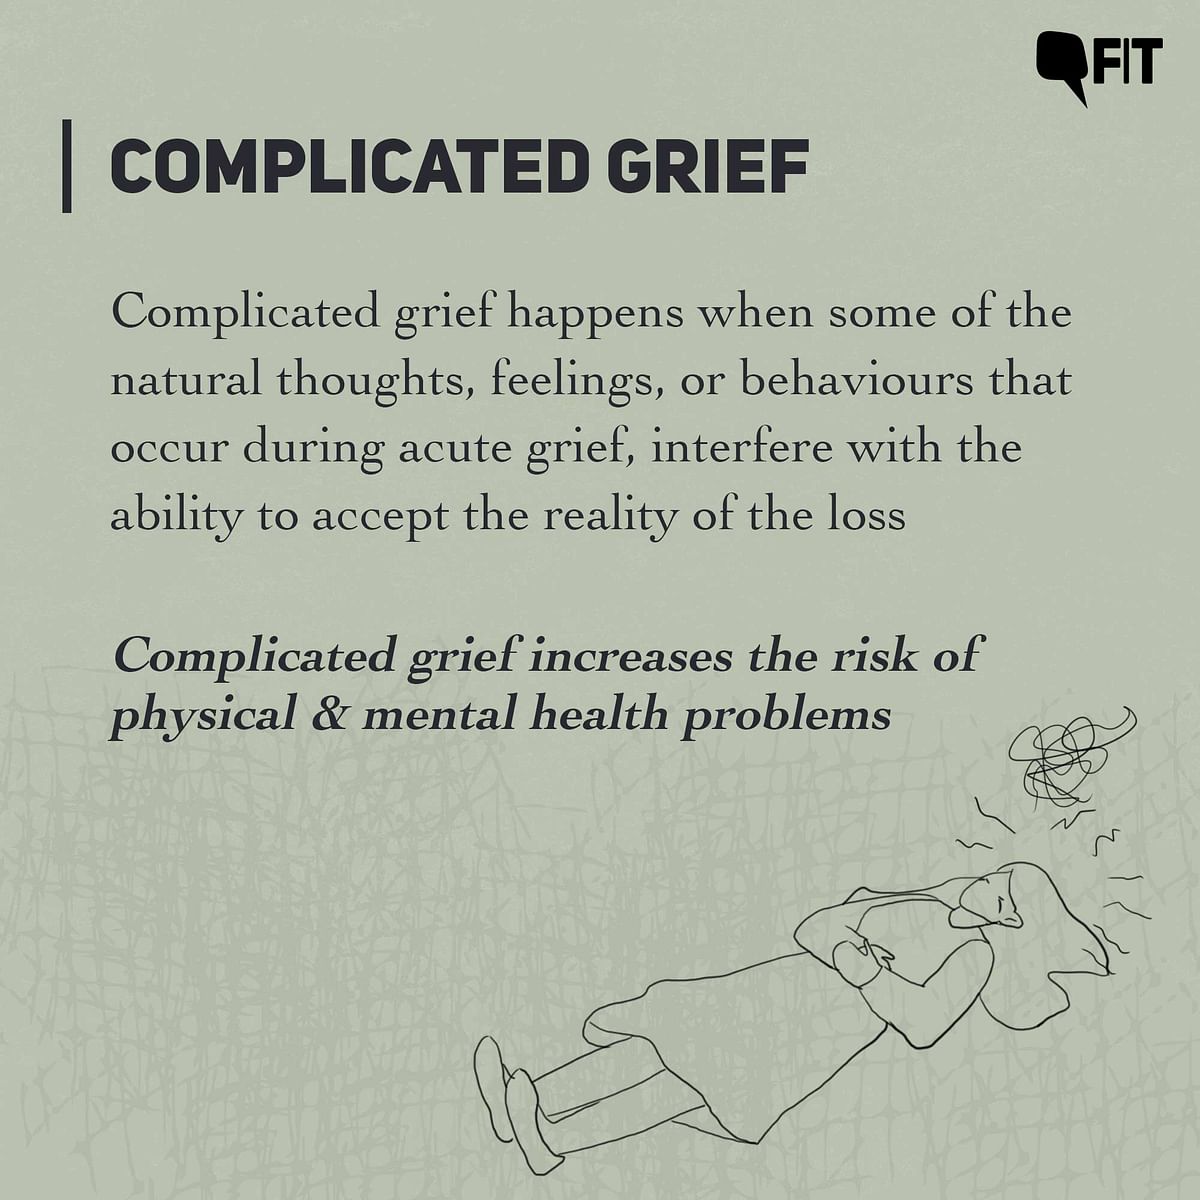 How Grief Can Affect Your Health